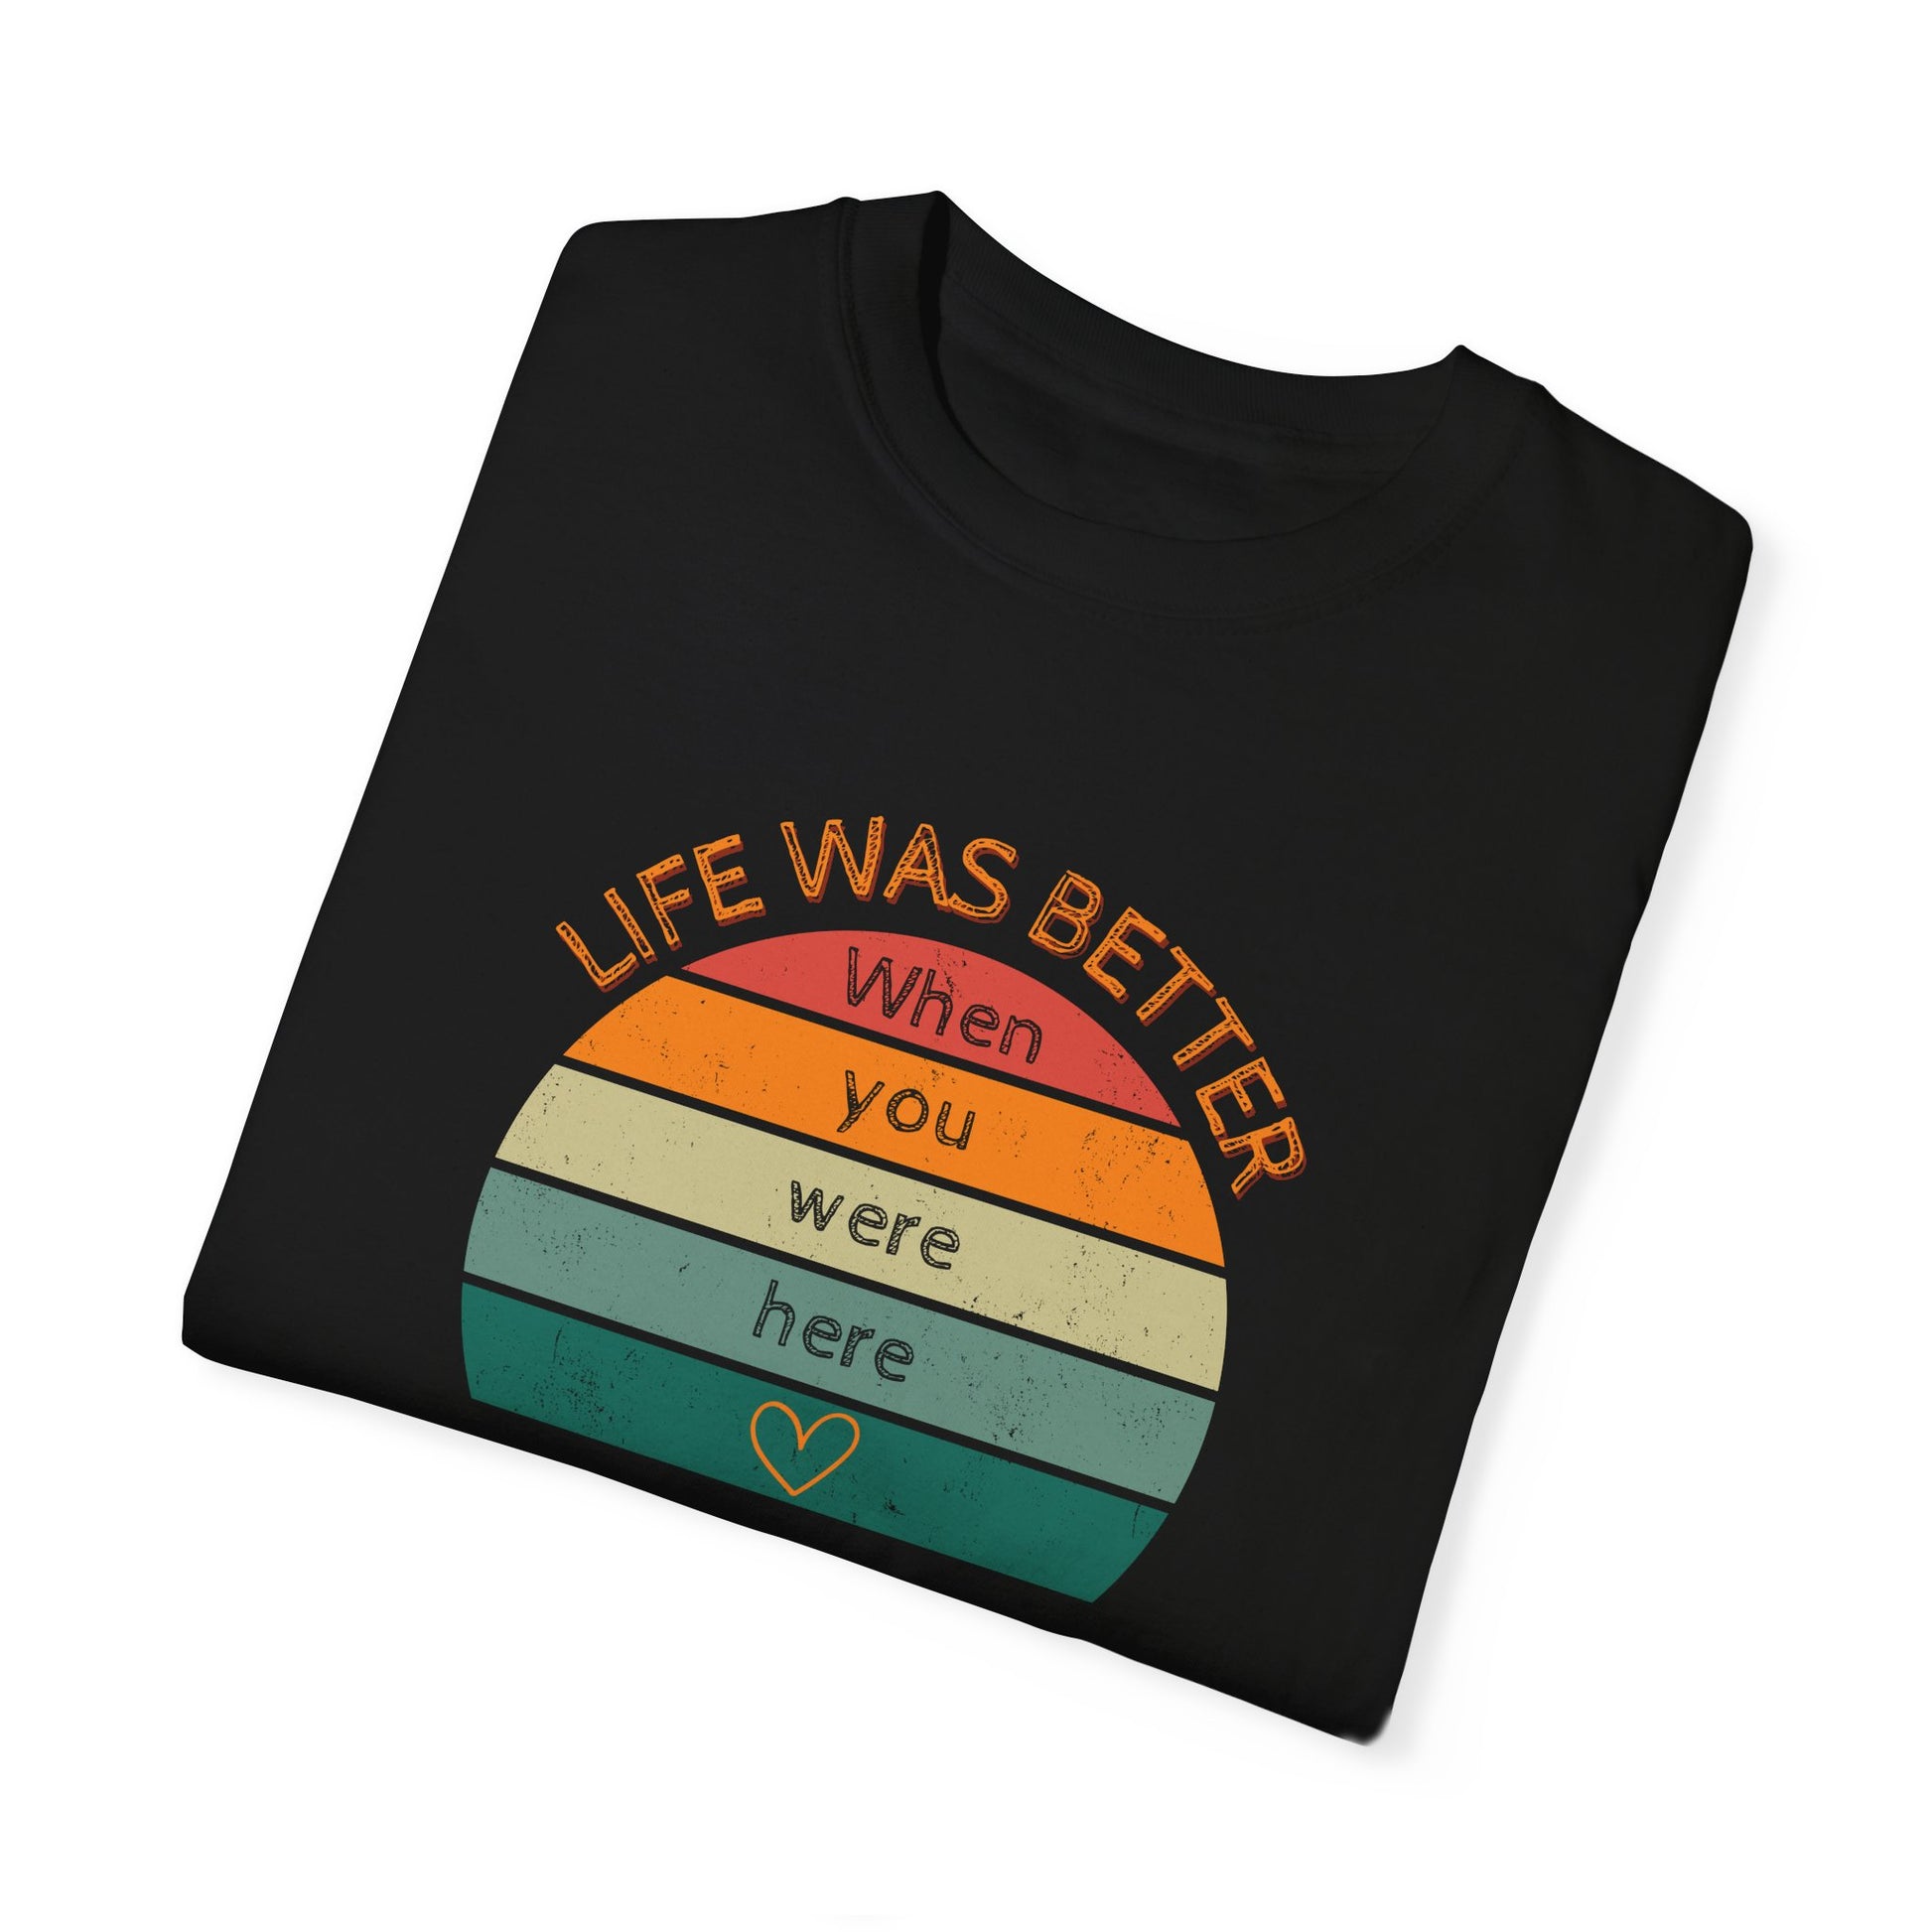 Black Comfort Colors Tee. Reminisce in style with this heartfelt t-shirt. "Life was better when you were here."